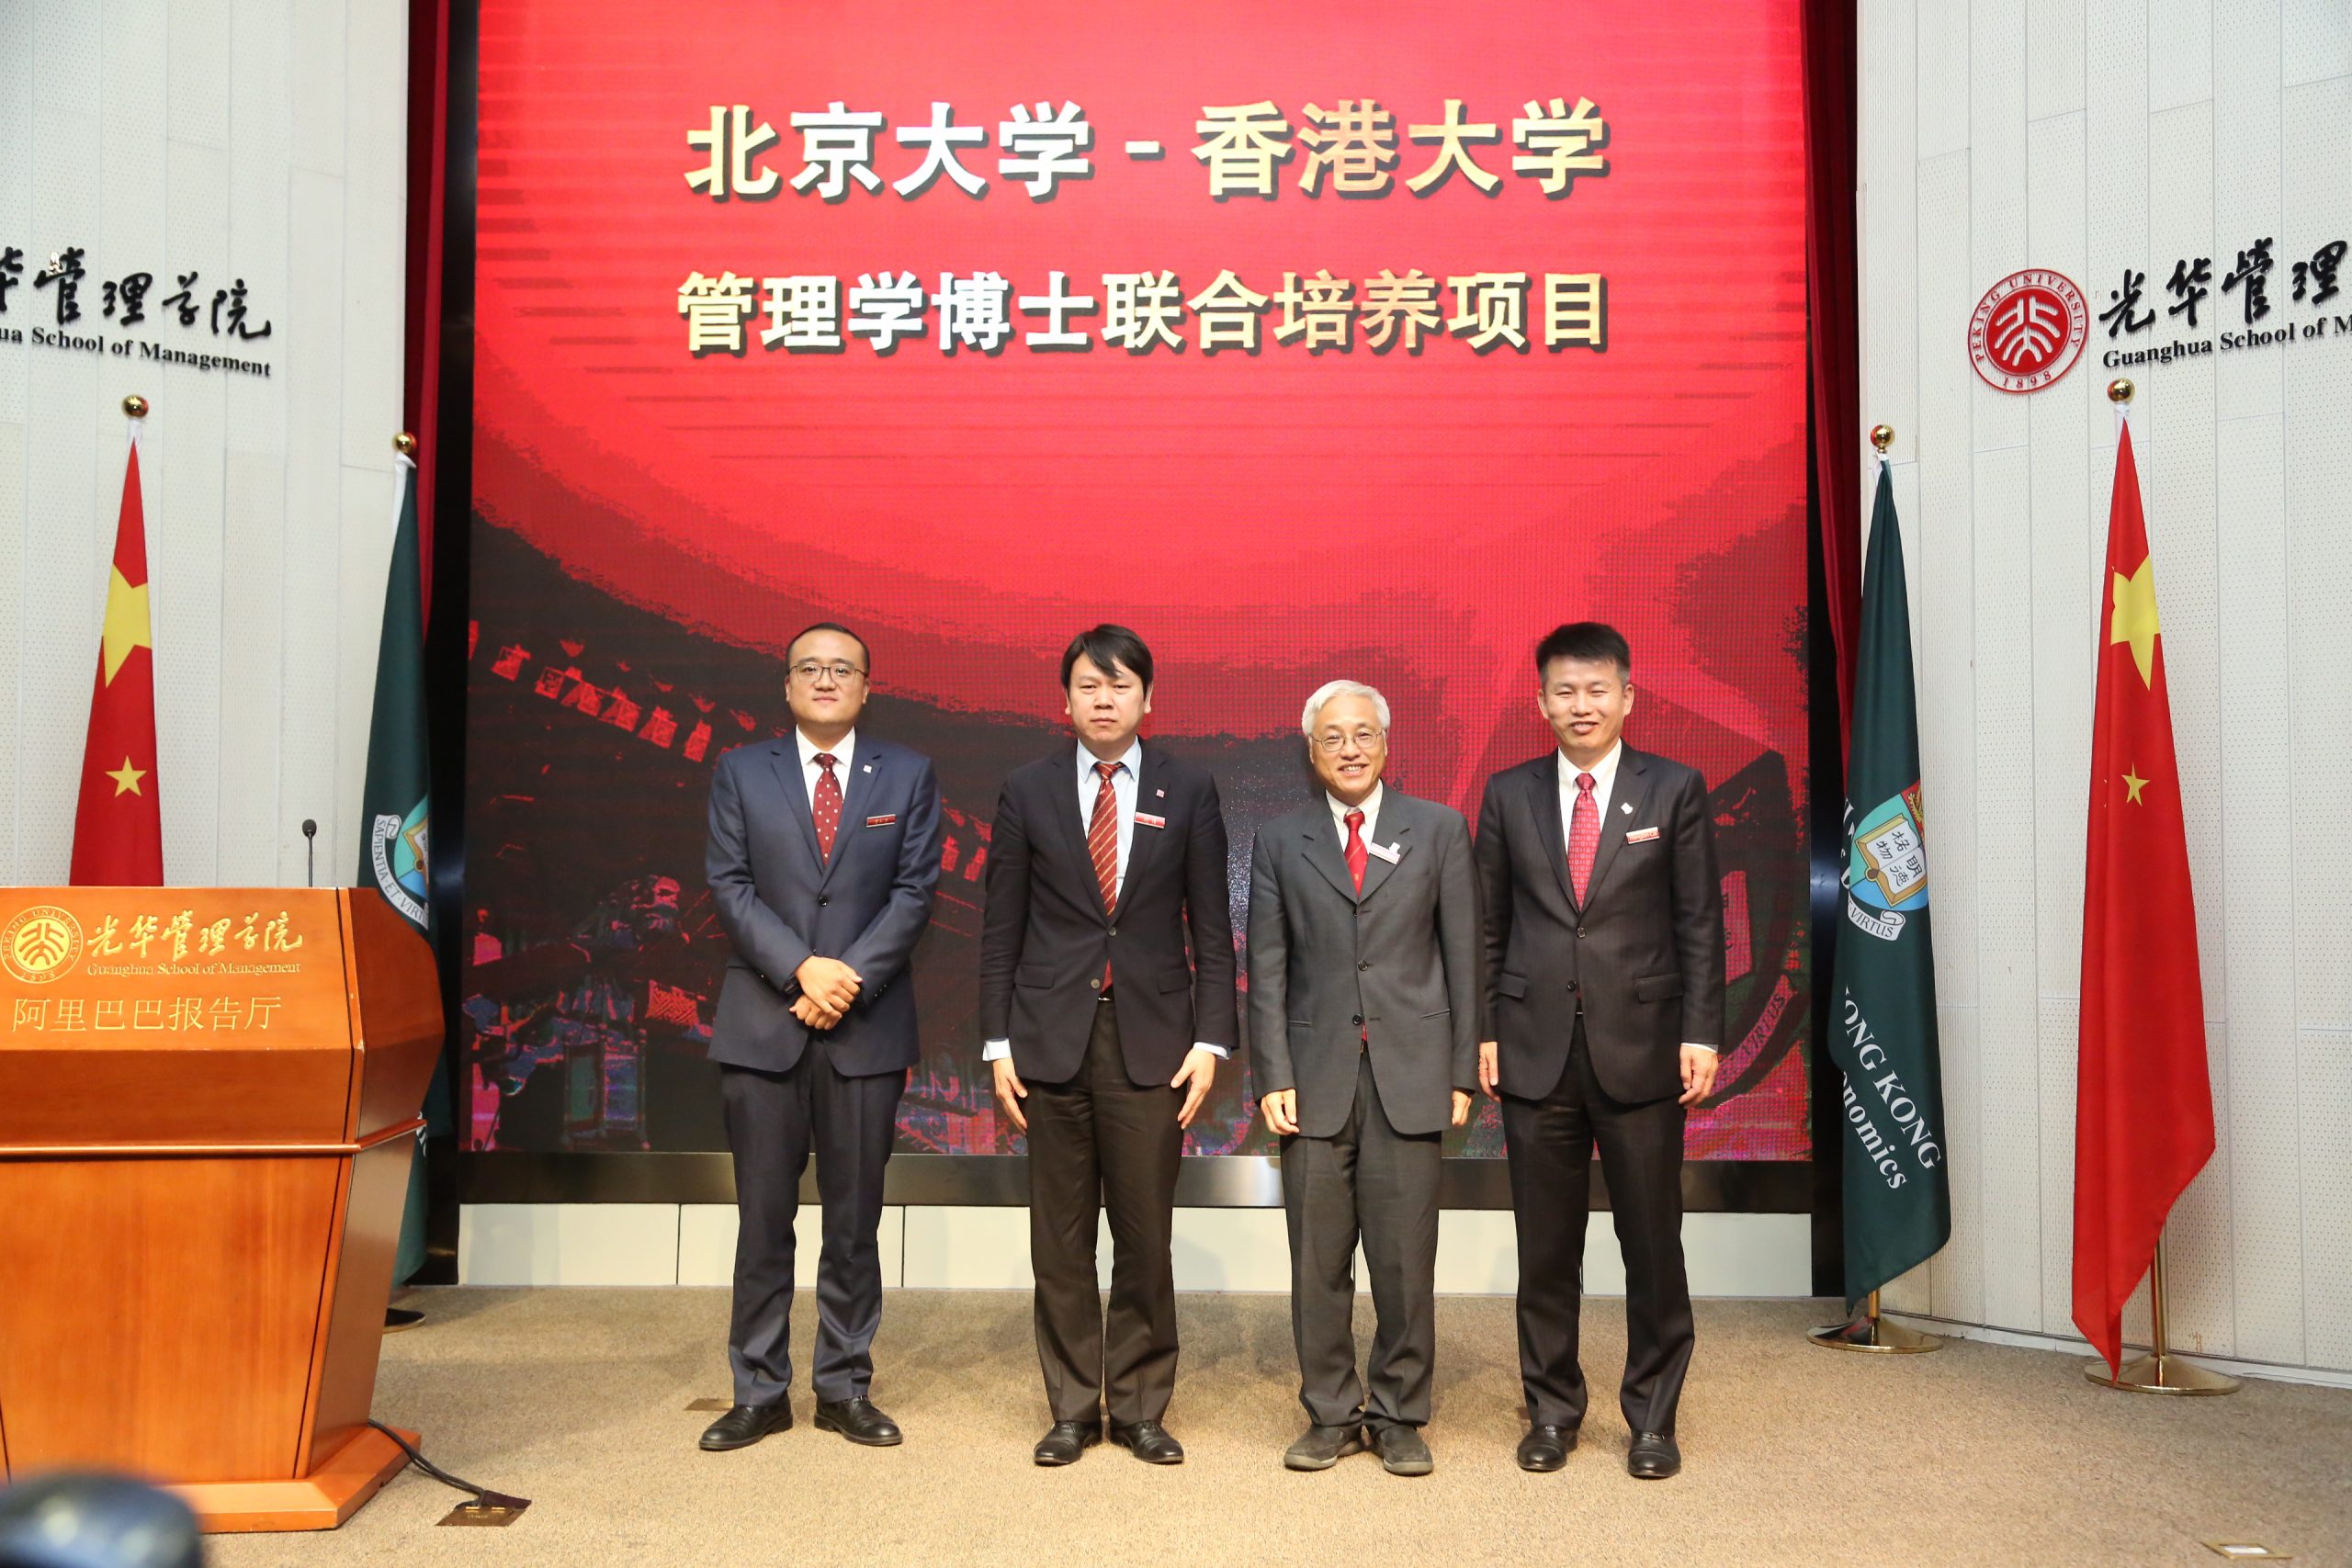 DBA programme launched in collaboration with Guanghua School of Management of Peking University